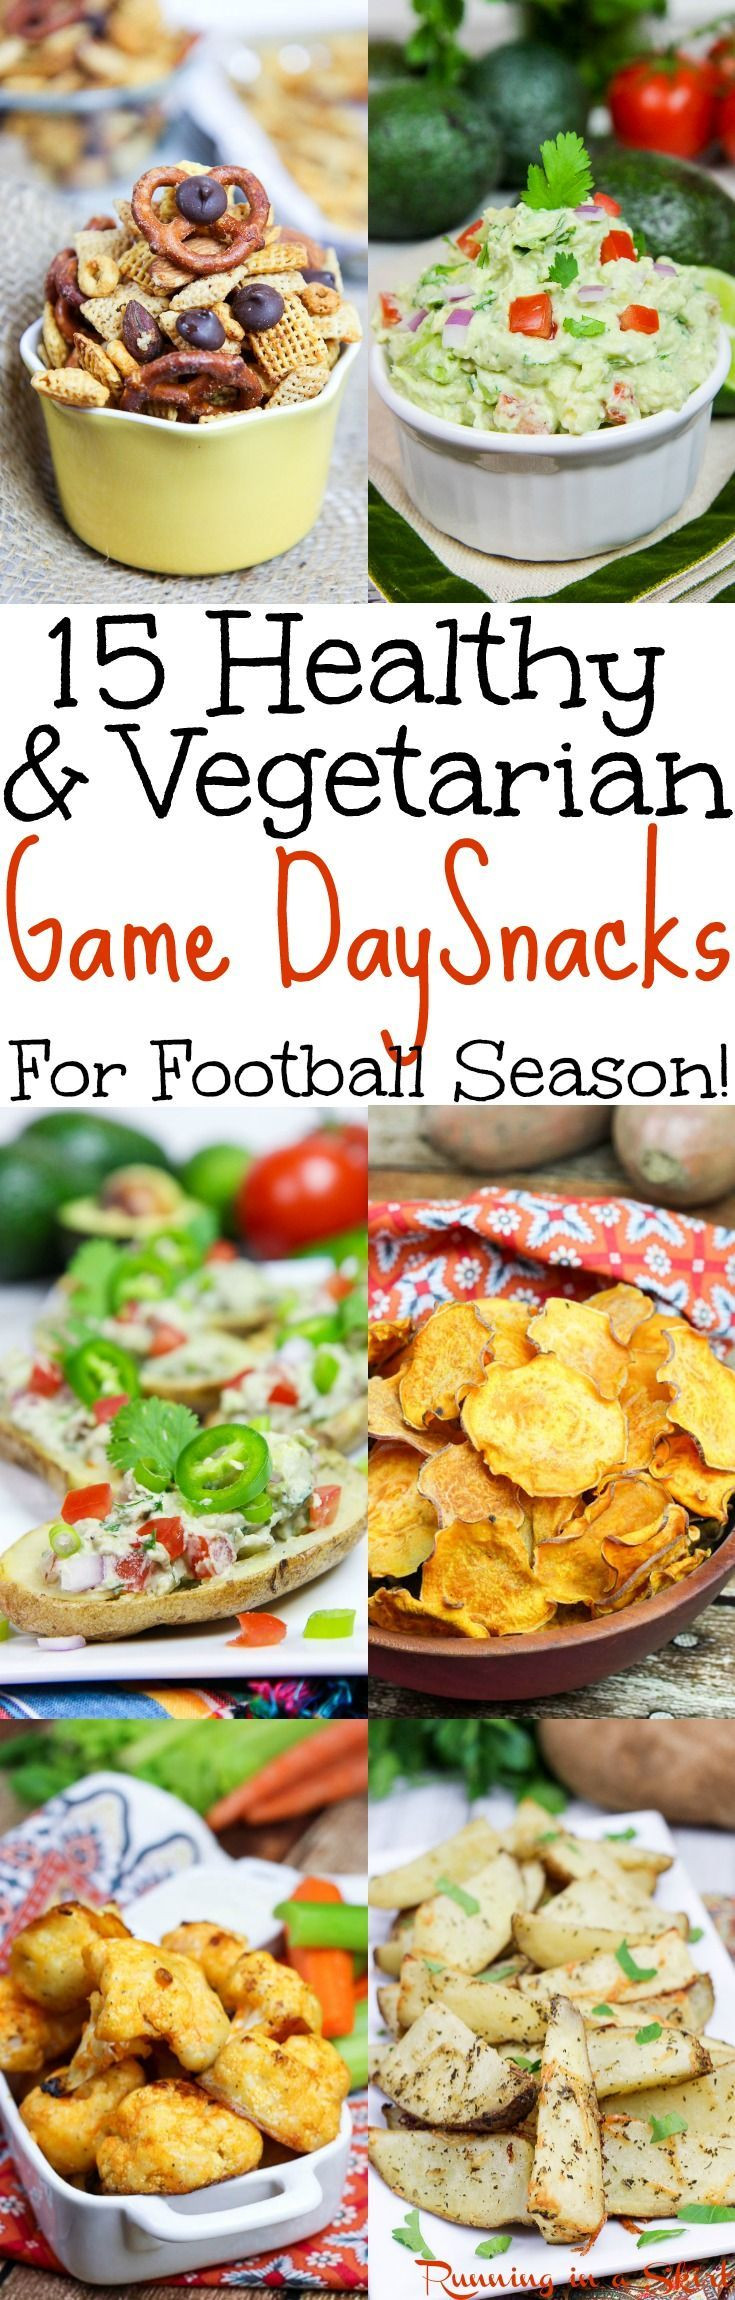 Healthy Snacks For Football Games
 best Healthy Life images on Pinterest